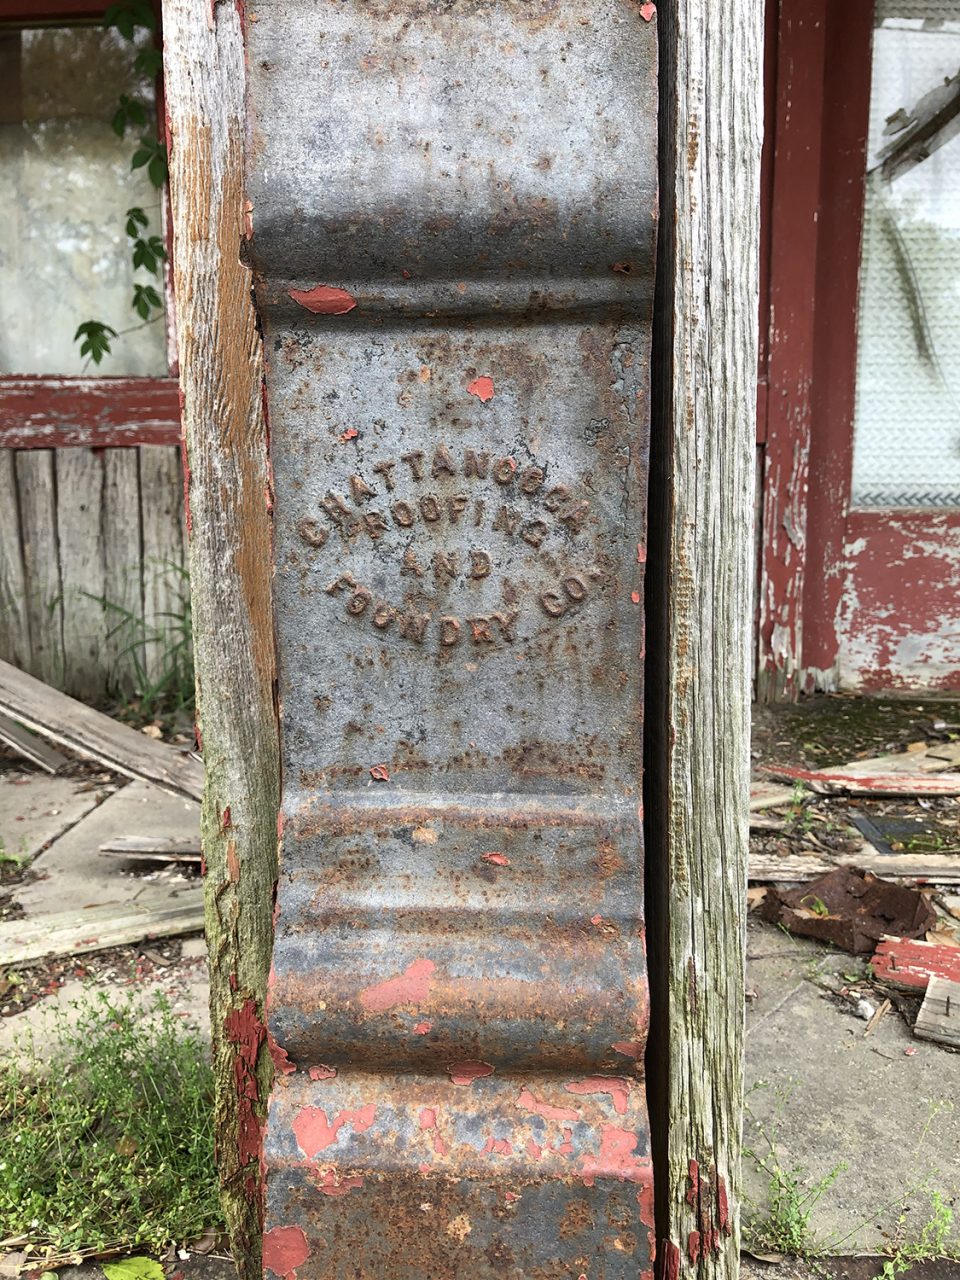 Chattanooga Roofing and Foundry Co. column found on an abandoned and collapsing building in Itta Bena, Mississippi.